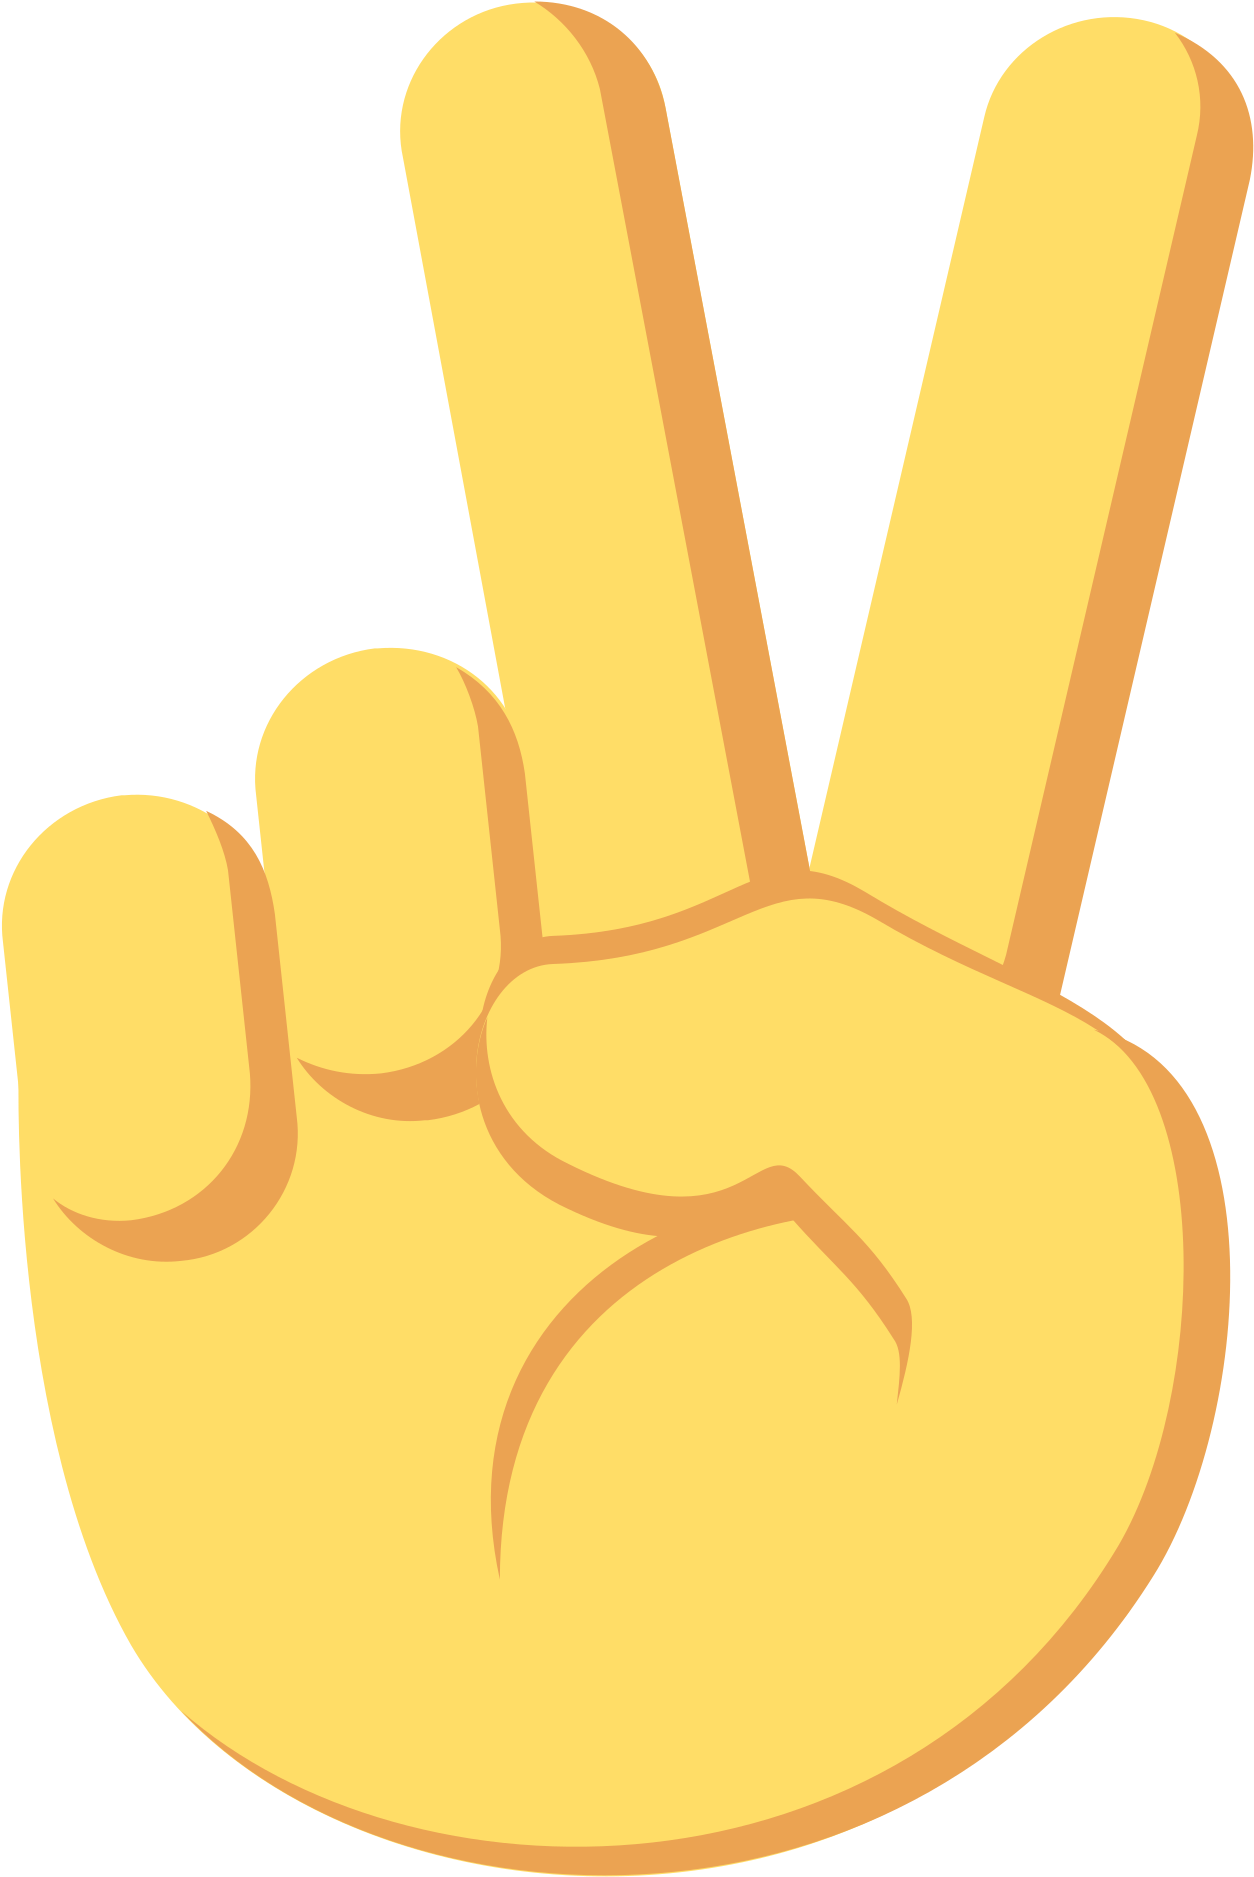 Peace Sign Emoji Graphic PNG